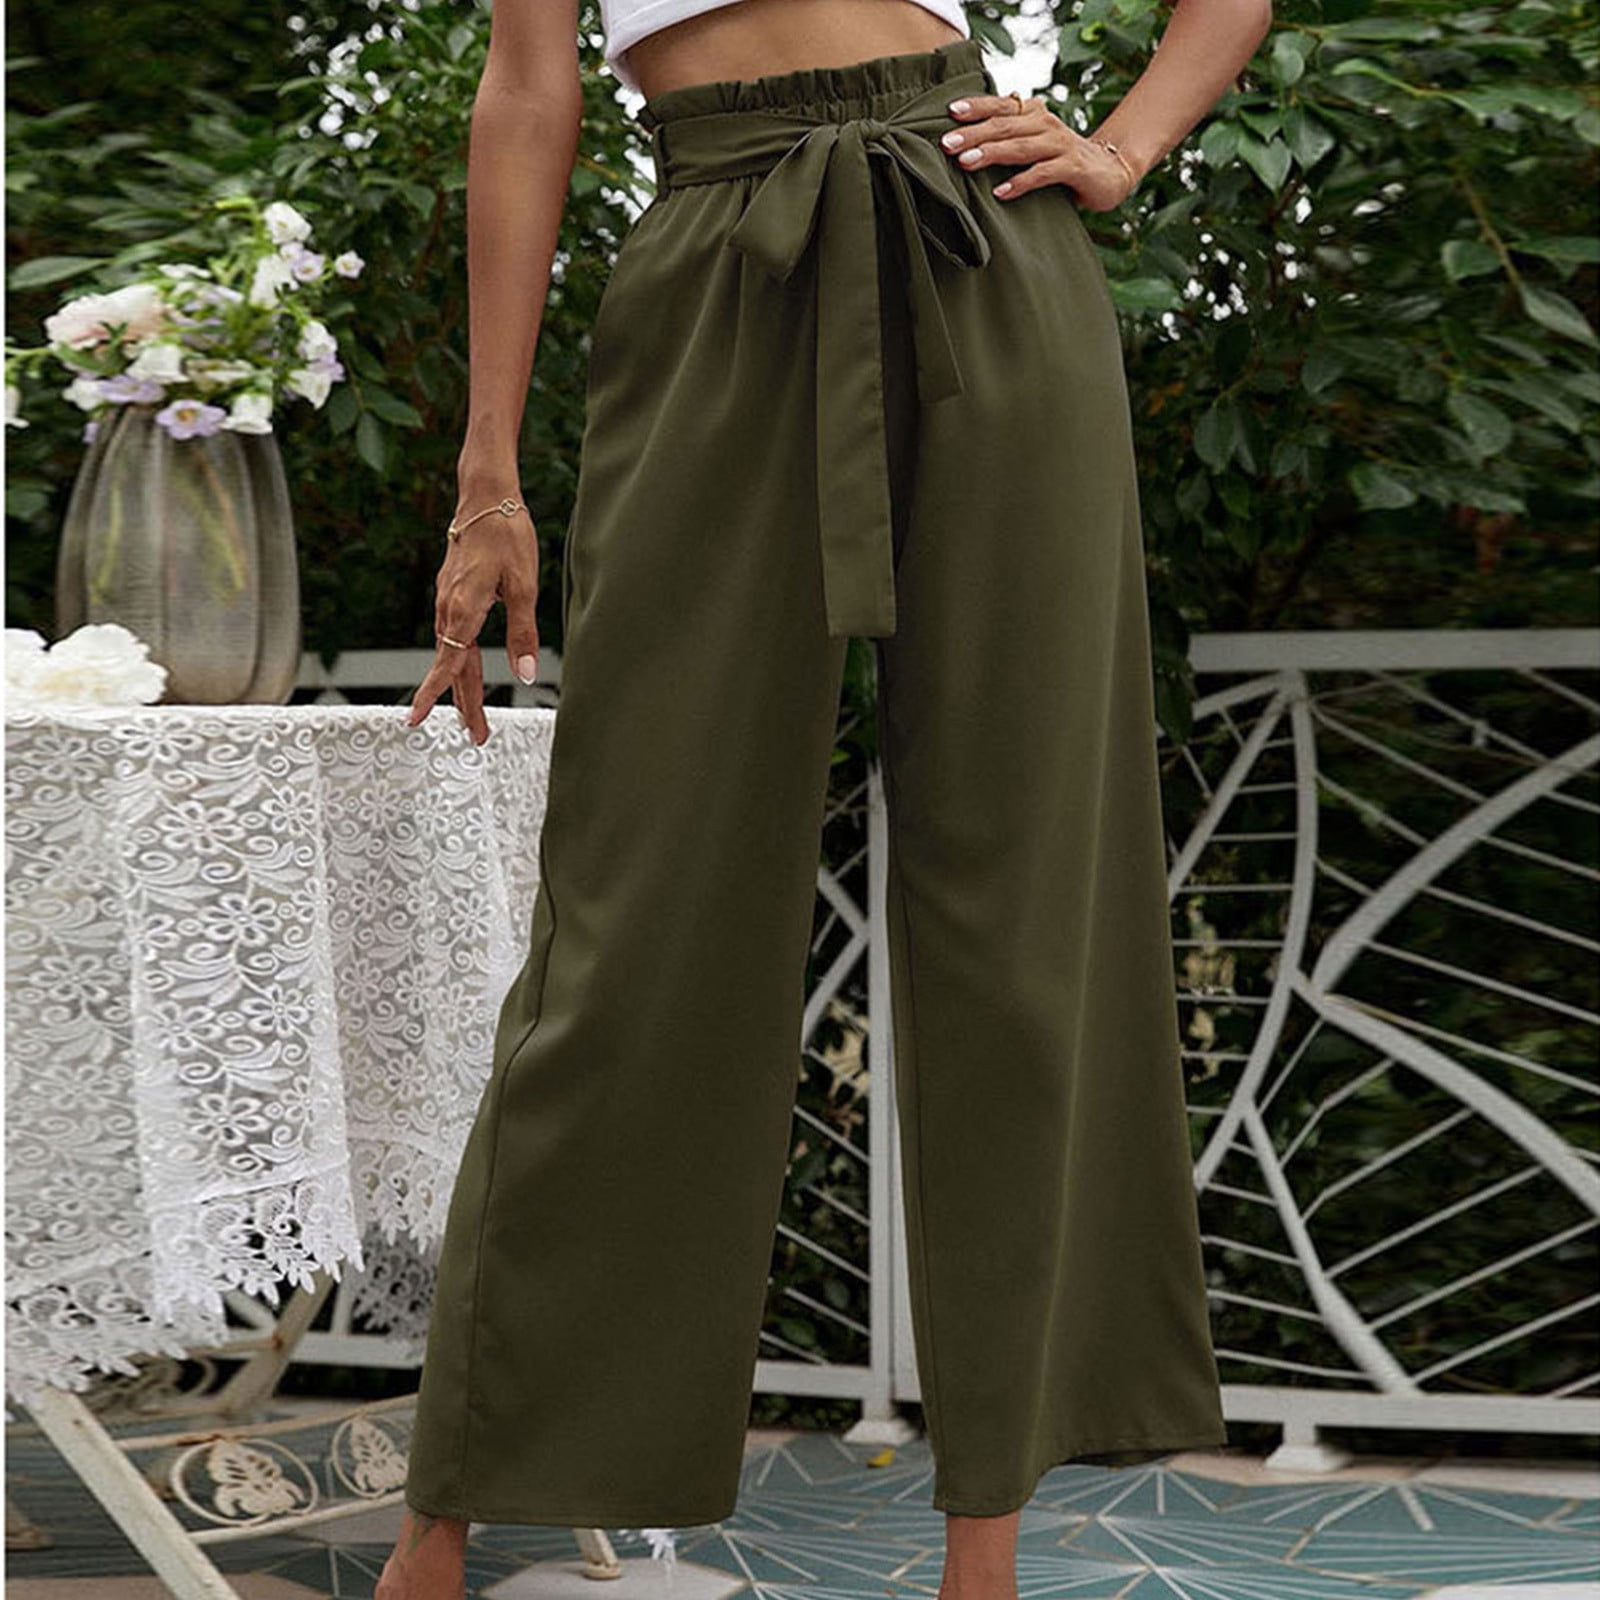  YHWW Wide Leg Pants,Casual Thick Woolen Wide Leg Pants Women  Autumn Winter Girls Loose High Waist Plaid Trousers Female L Coffee :  Clothing, Shoes & Jewelry